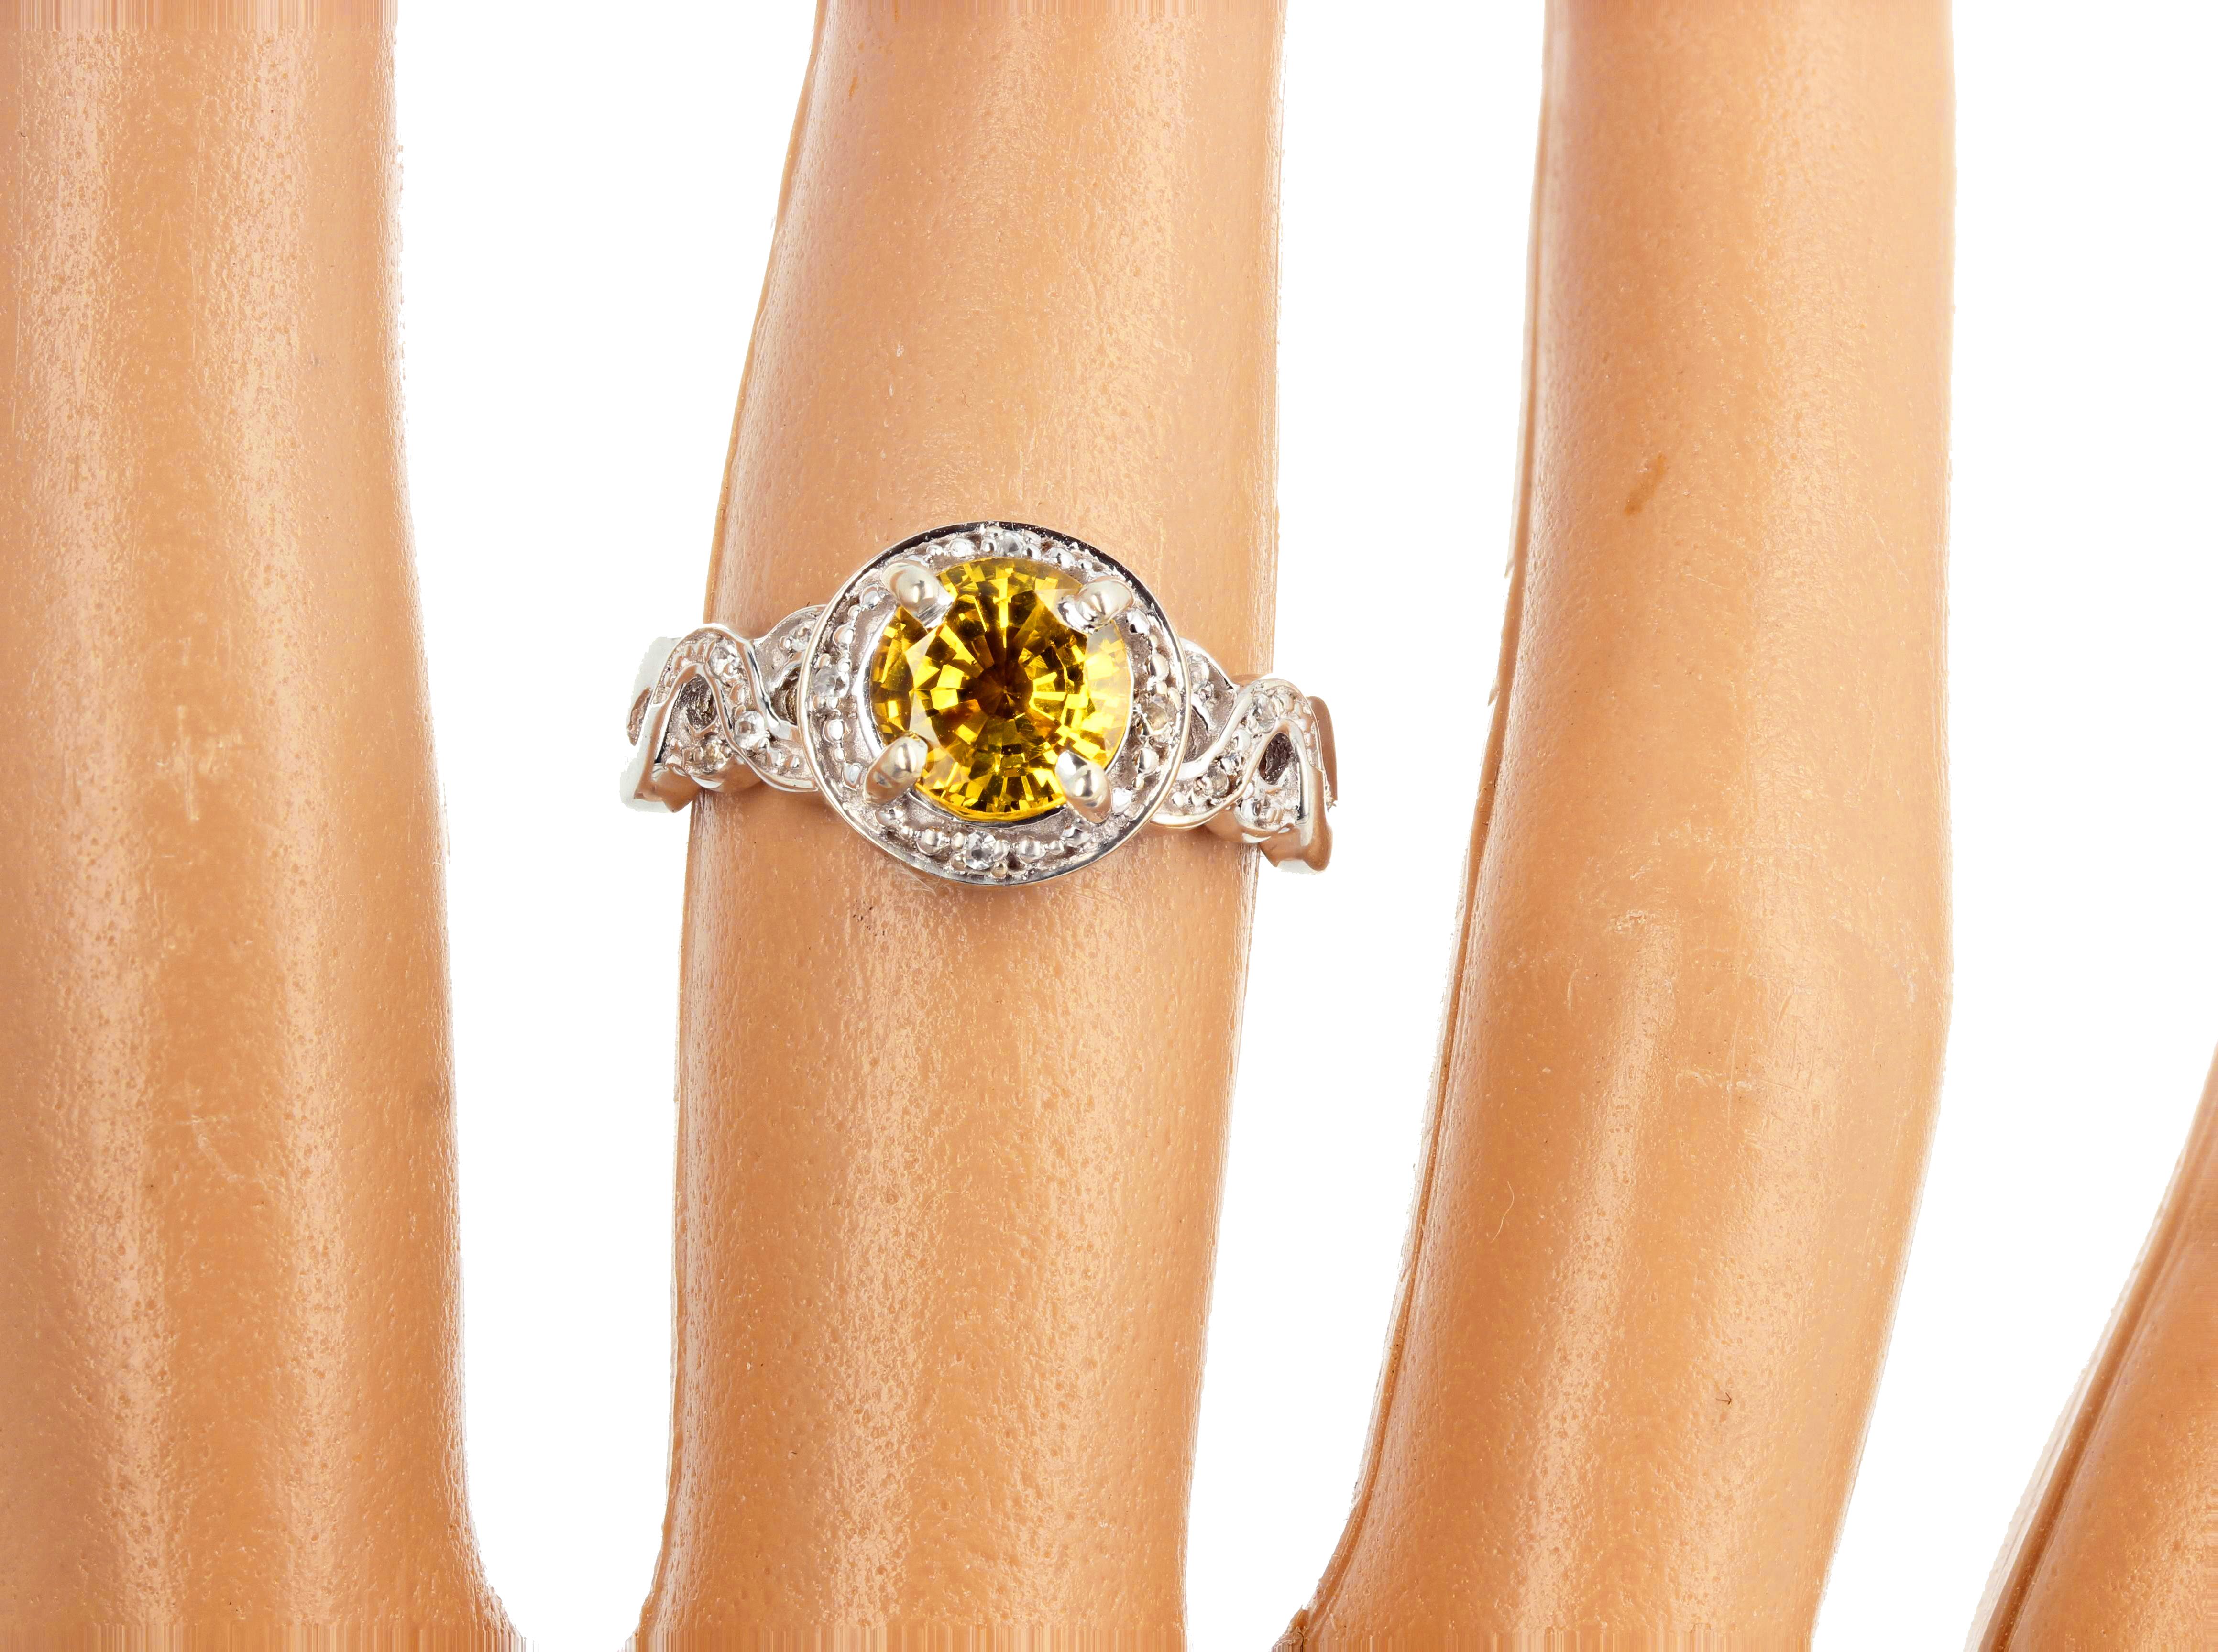 AJD Brilliantly Sparkling 1.3 Ct Canary Yellow Spinel & Diamonds Ring For Sale 2